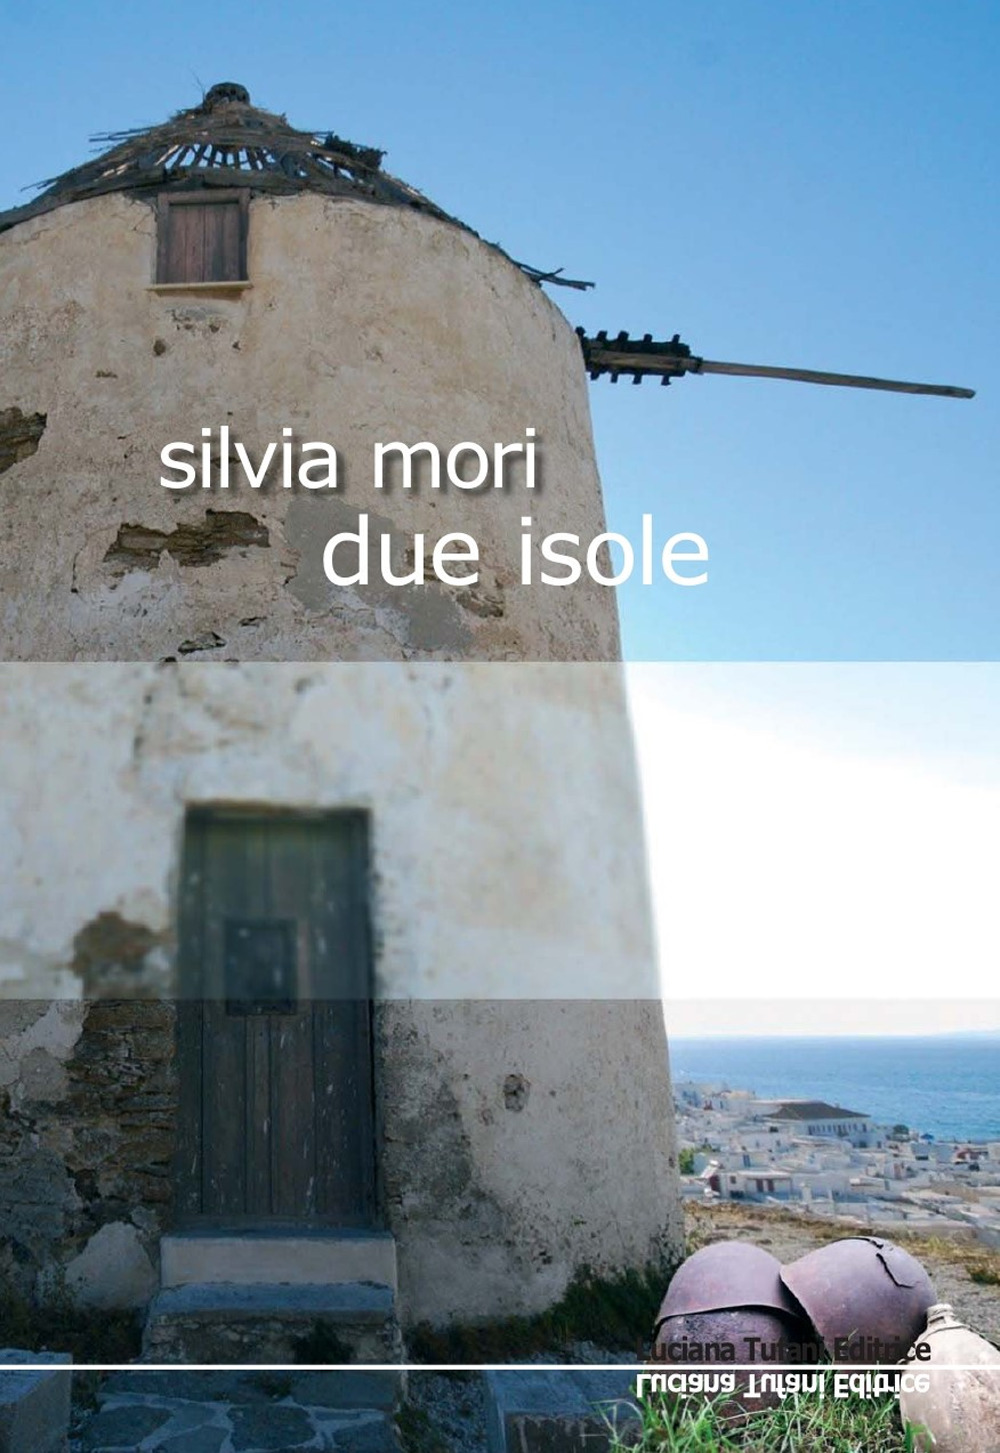 Due isole